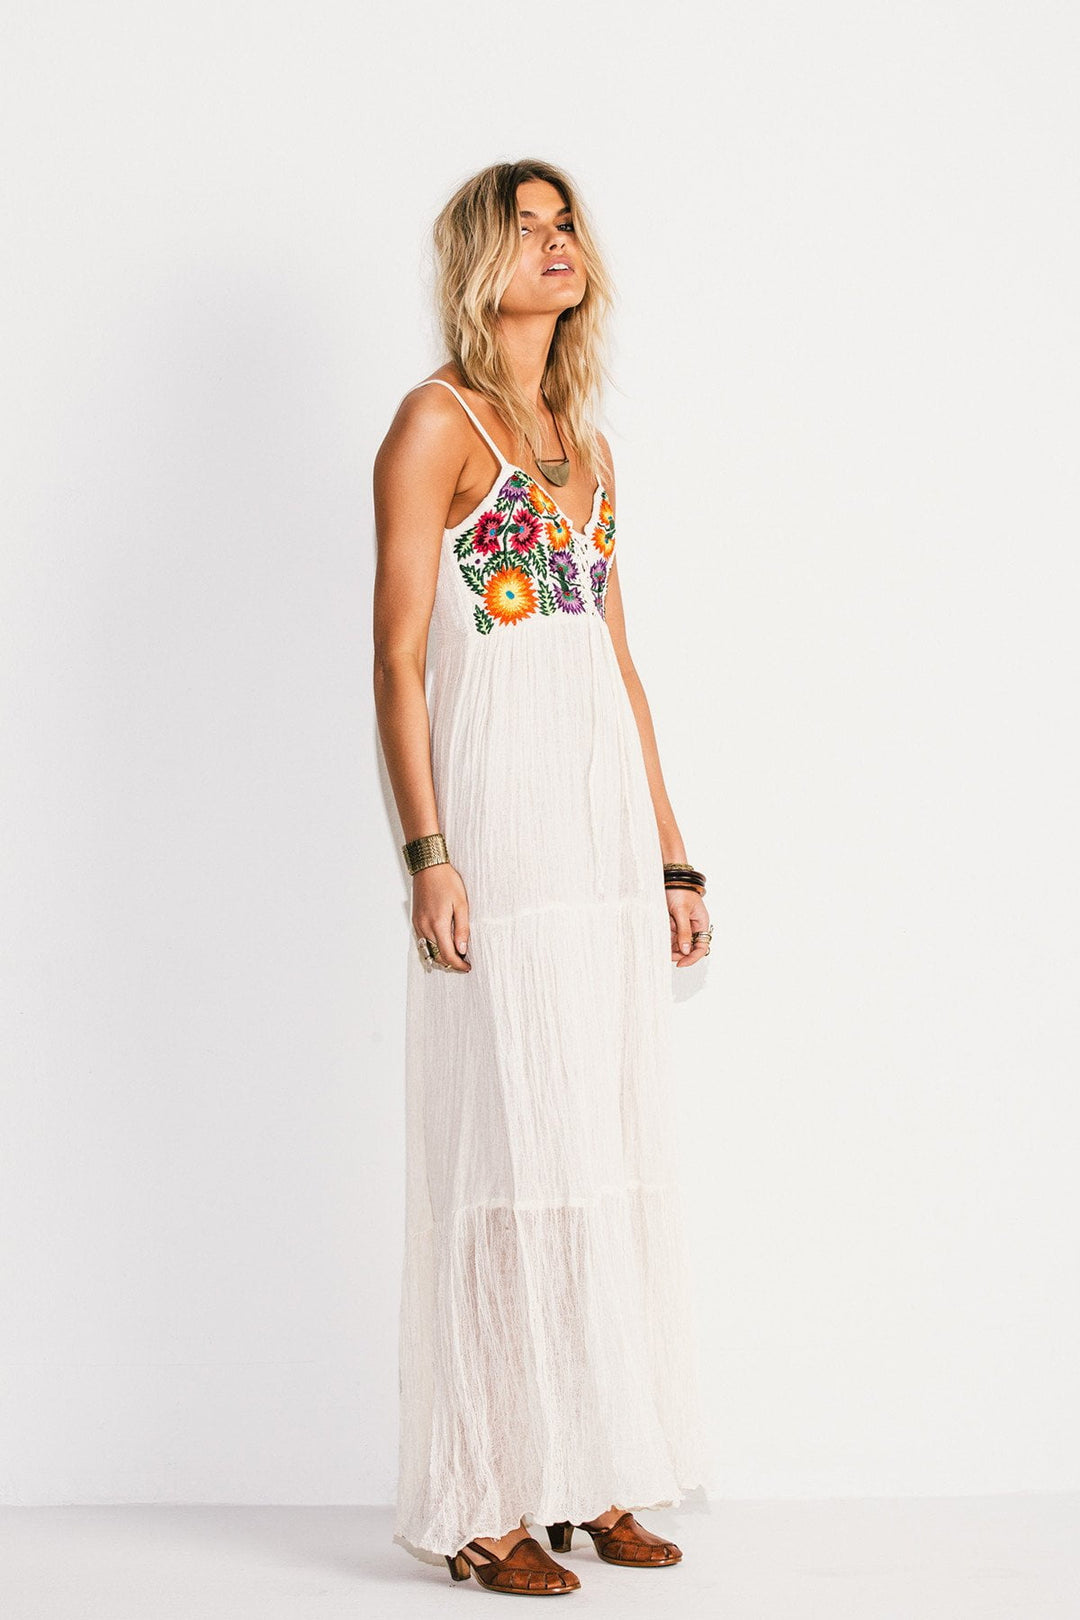 Jen's Pirate Booty Summer Bloom Coquette Maxi Dress at Blond Genius - 3